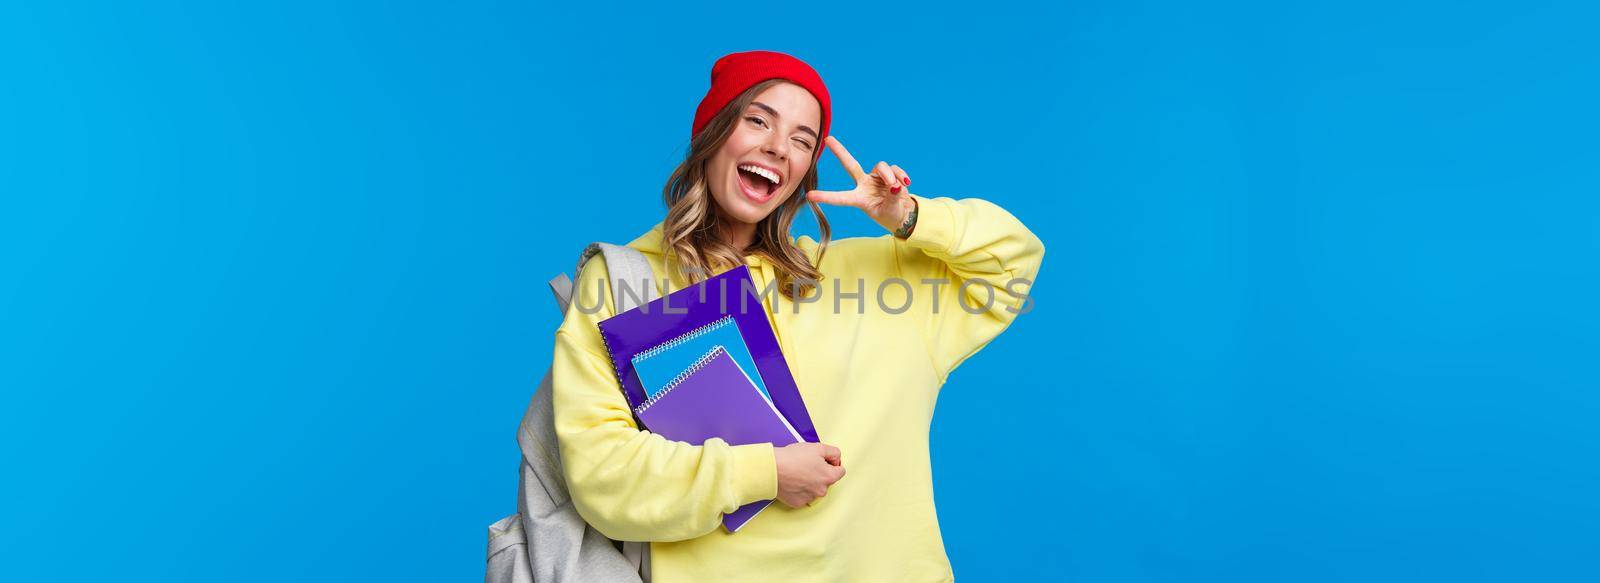 Education and learning concept. Cheerful smiling pretty female student showing peace gesture, enjoying college life, wink and gaze optimistic, studying hard, holding notebooks and backpack.